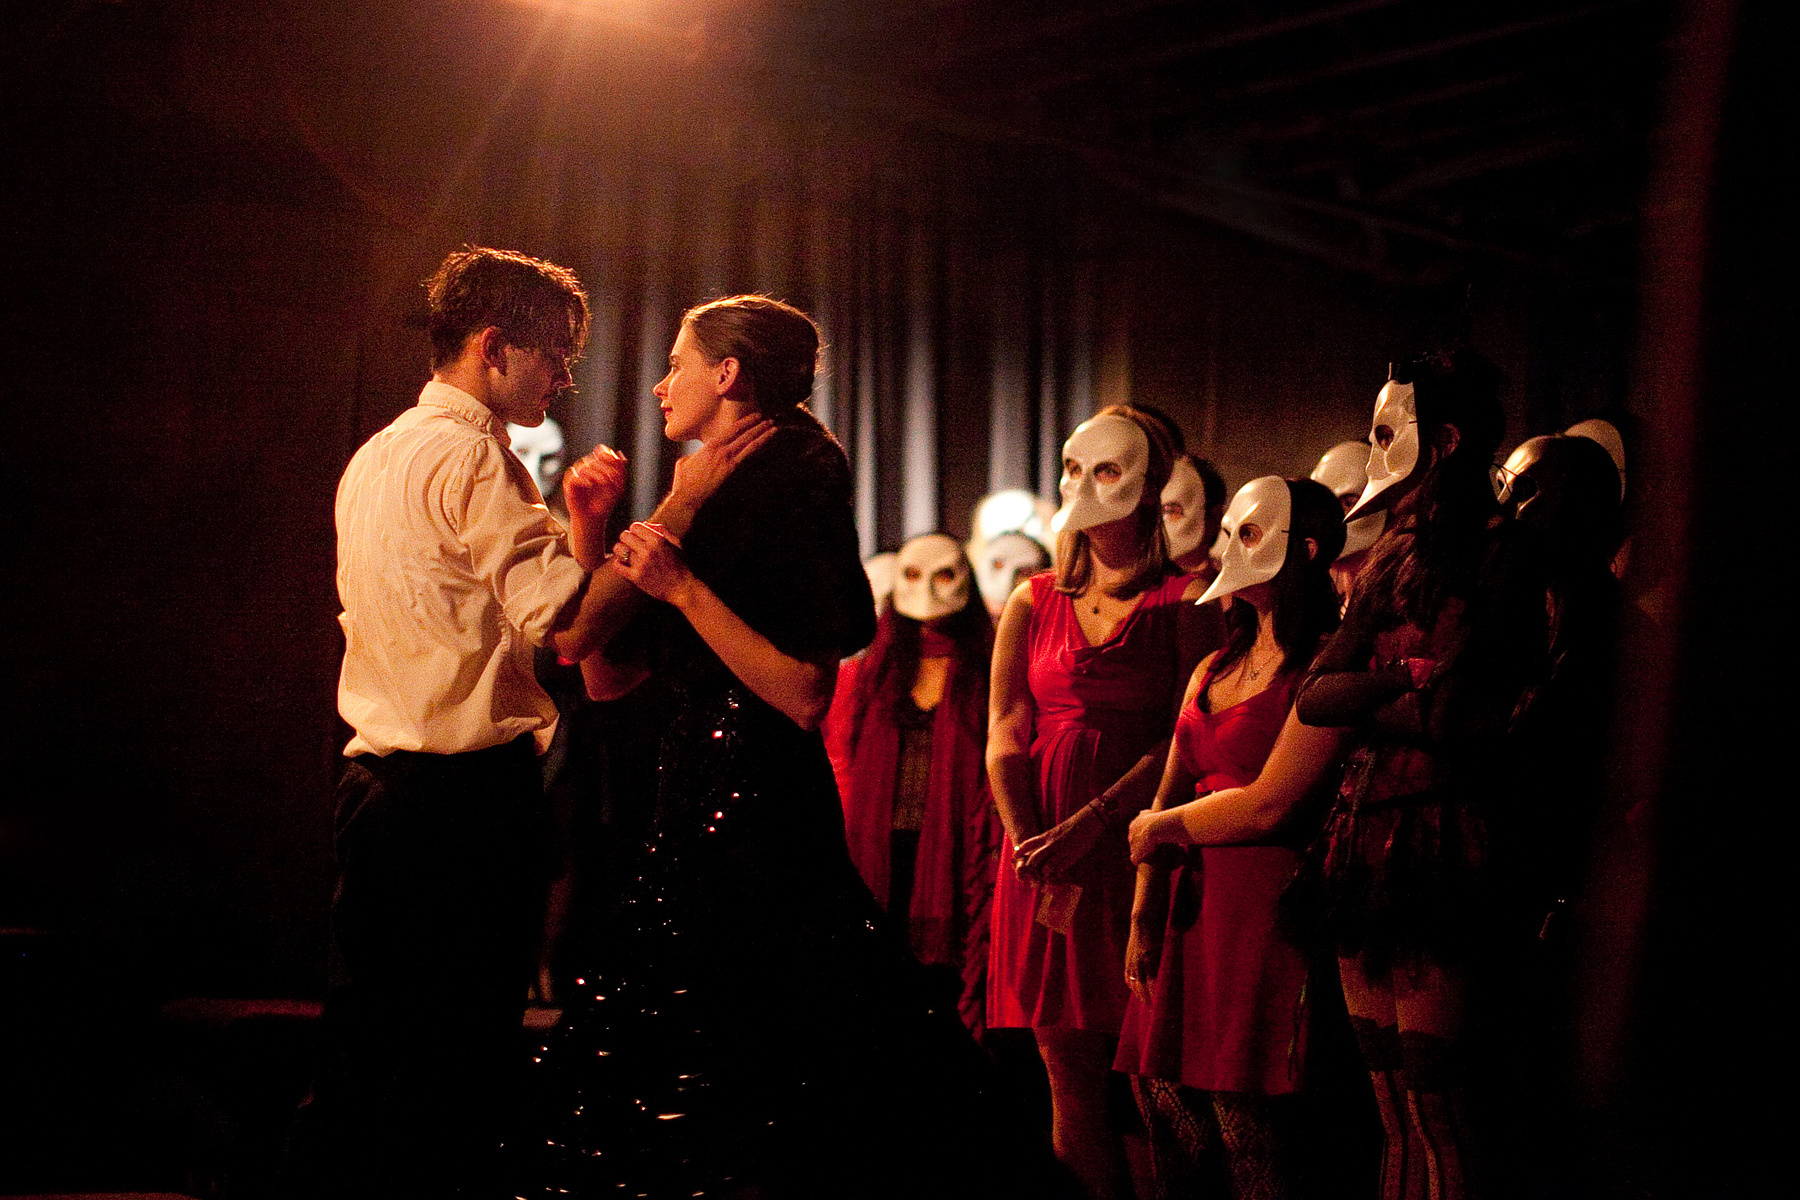 A image of two performers performing infront of a crowd of audience with masks on. This is a scene from the immersive show called sleep no more.